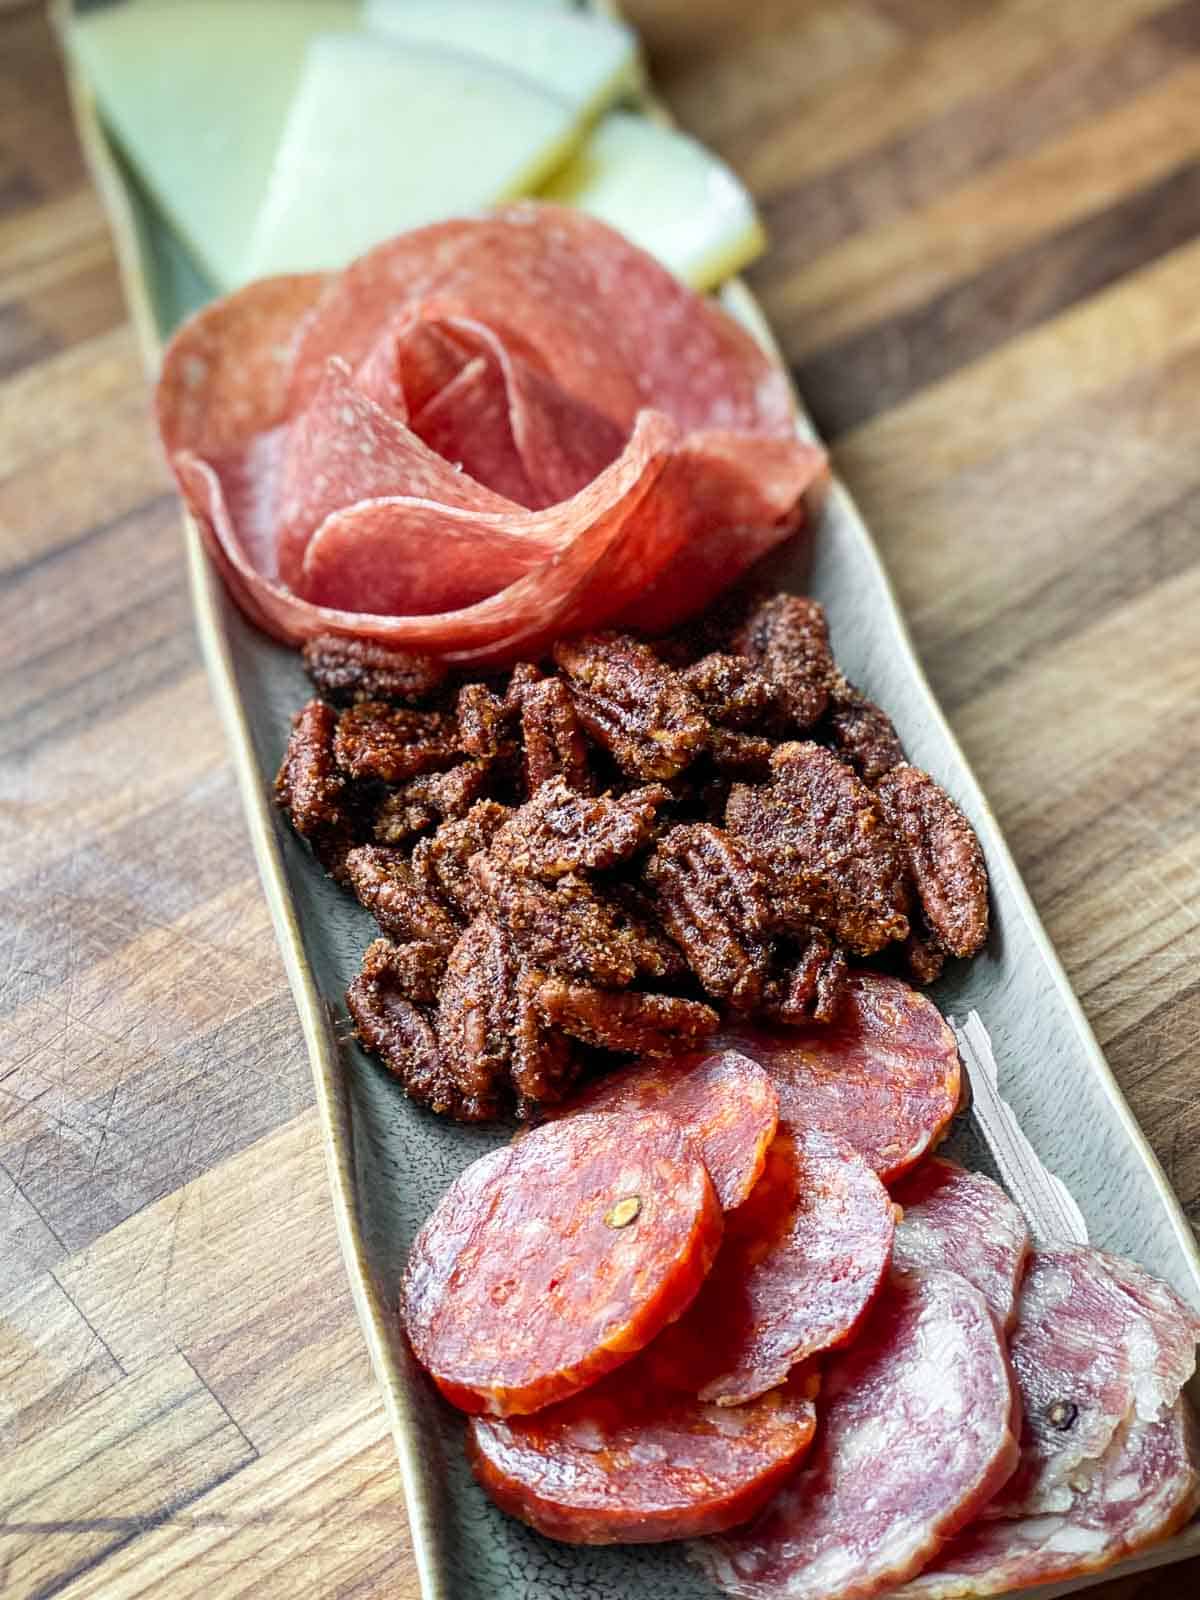 Charcuterie board full of a variety of meats, cheeses, and nibbles.